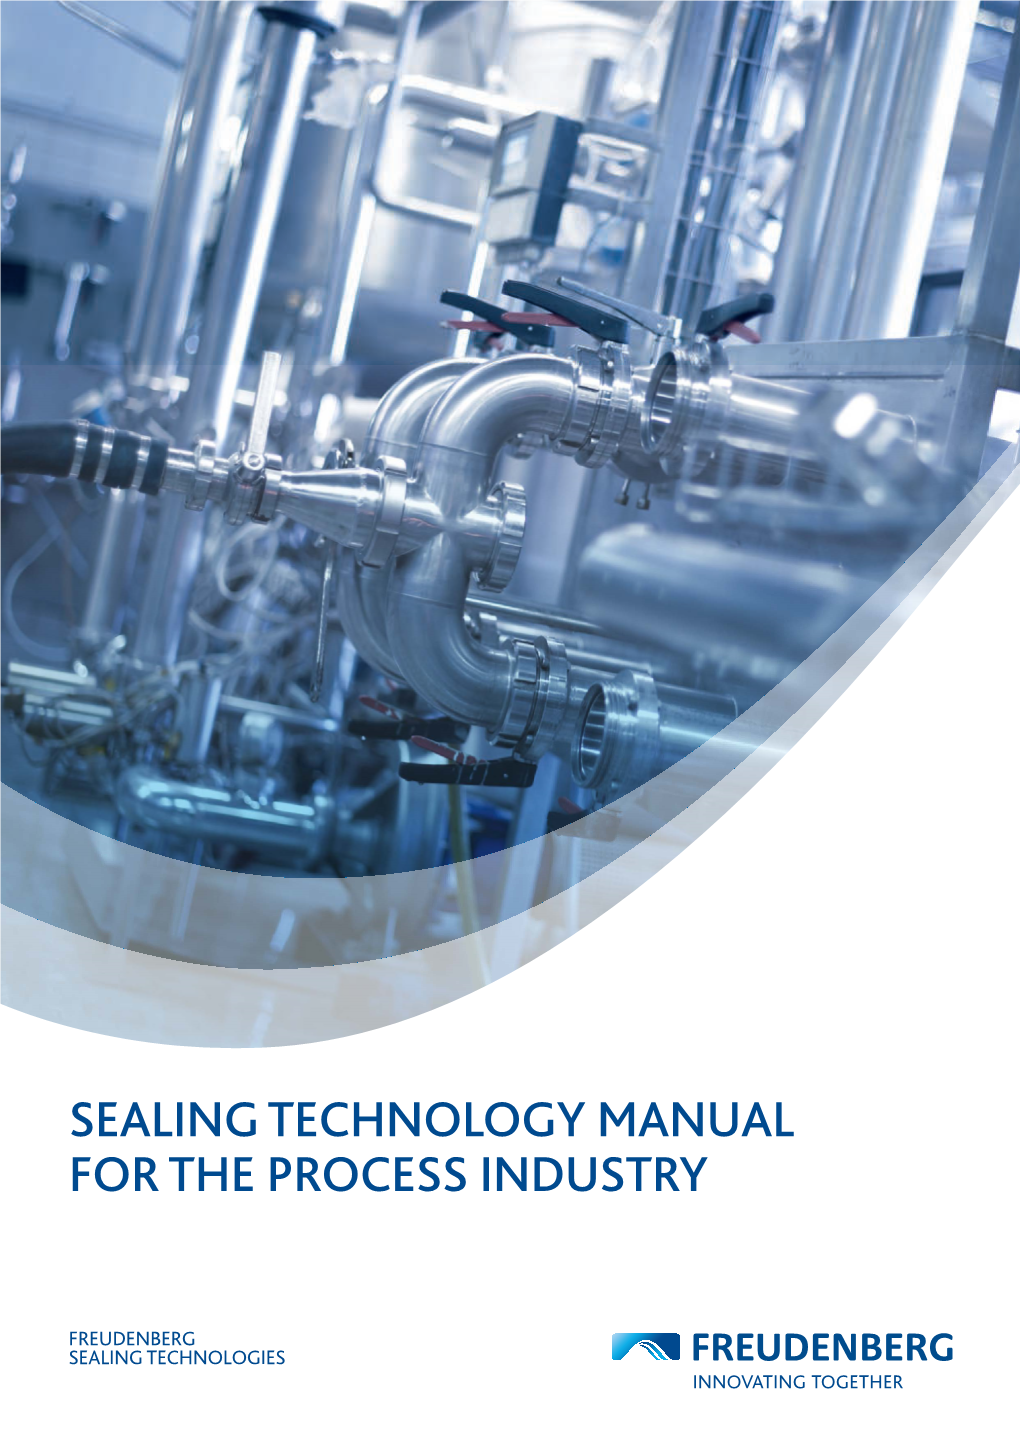 Sealing Technology Manual for the Process Industry Table of Contents